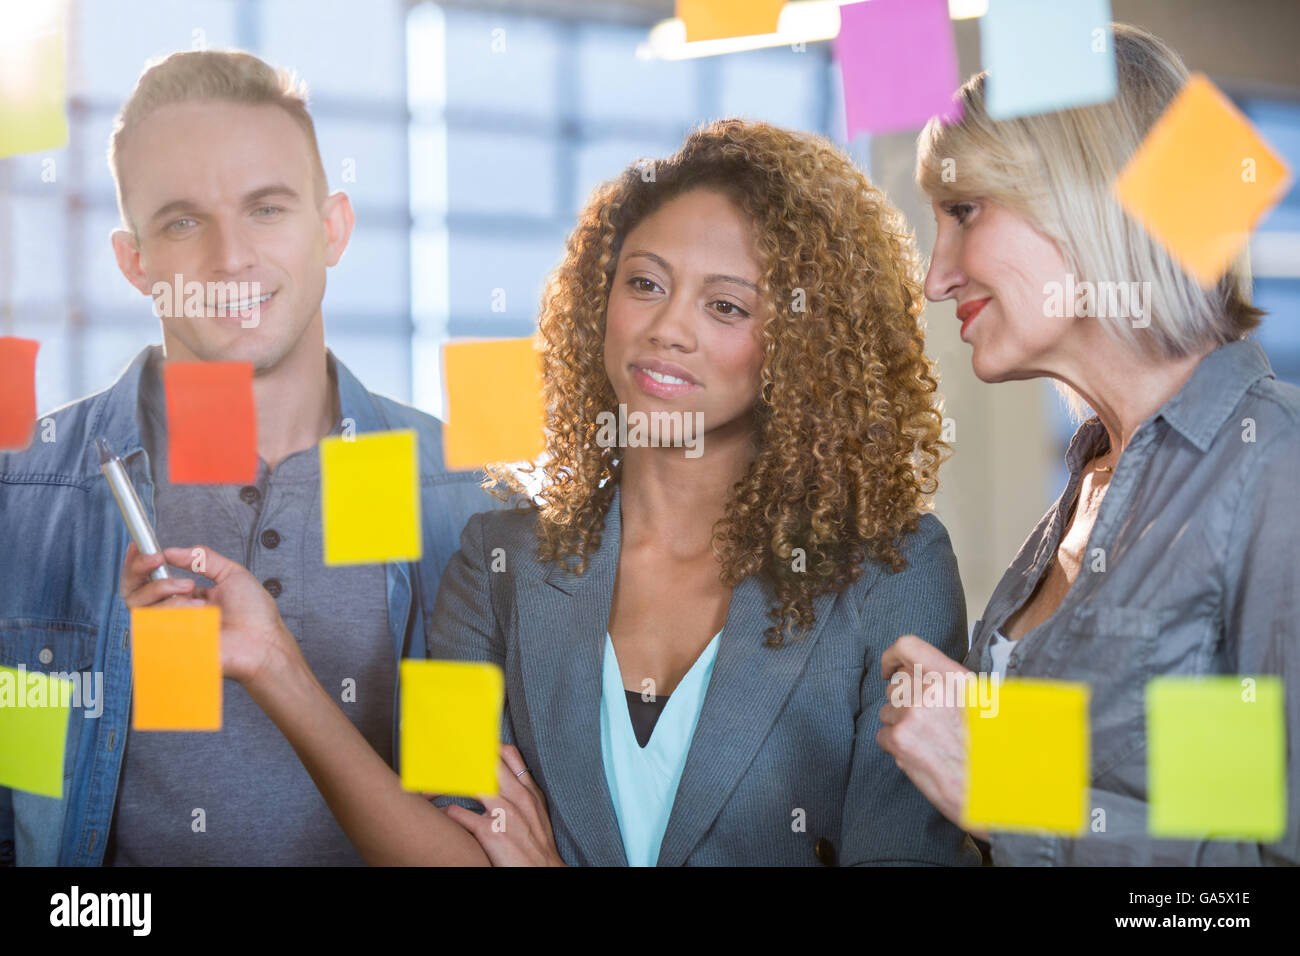 Business people looking at sticky notes stuck to glass Stock Photo